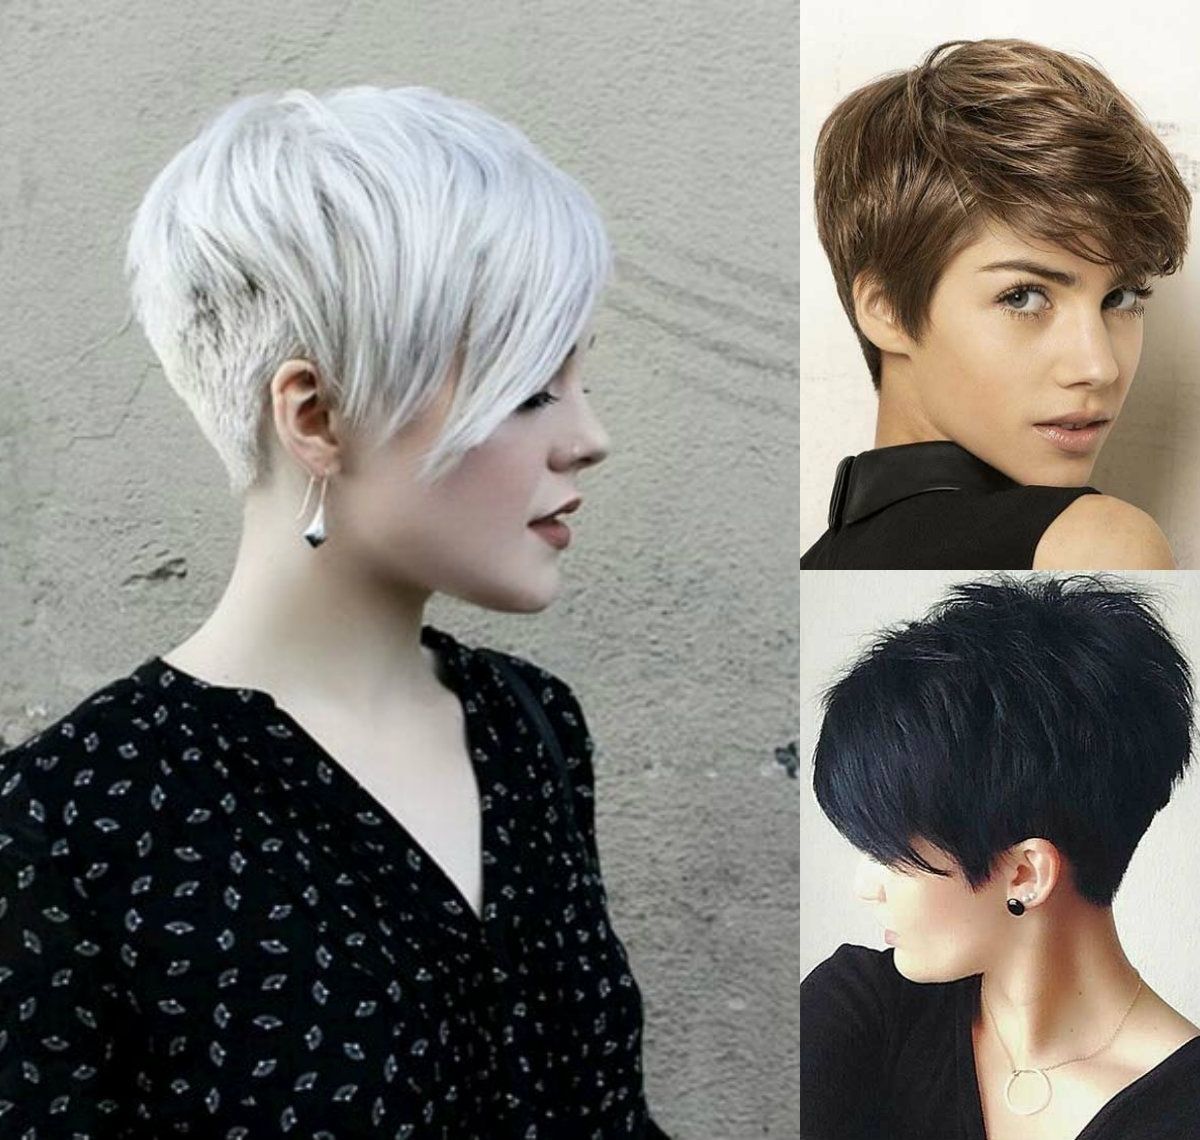 Vibrant Layered Pixie Haircuts 2017 | Hairdrome Throughout Most Recent Short Layered Pixie Hairstyles (View 4 of 15)